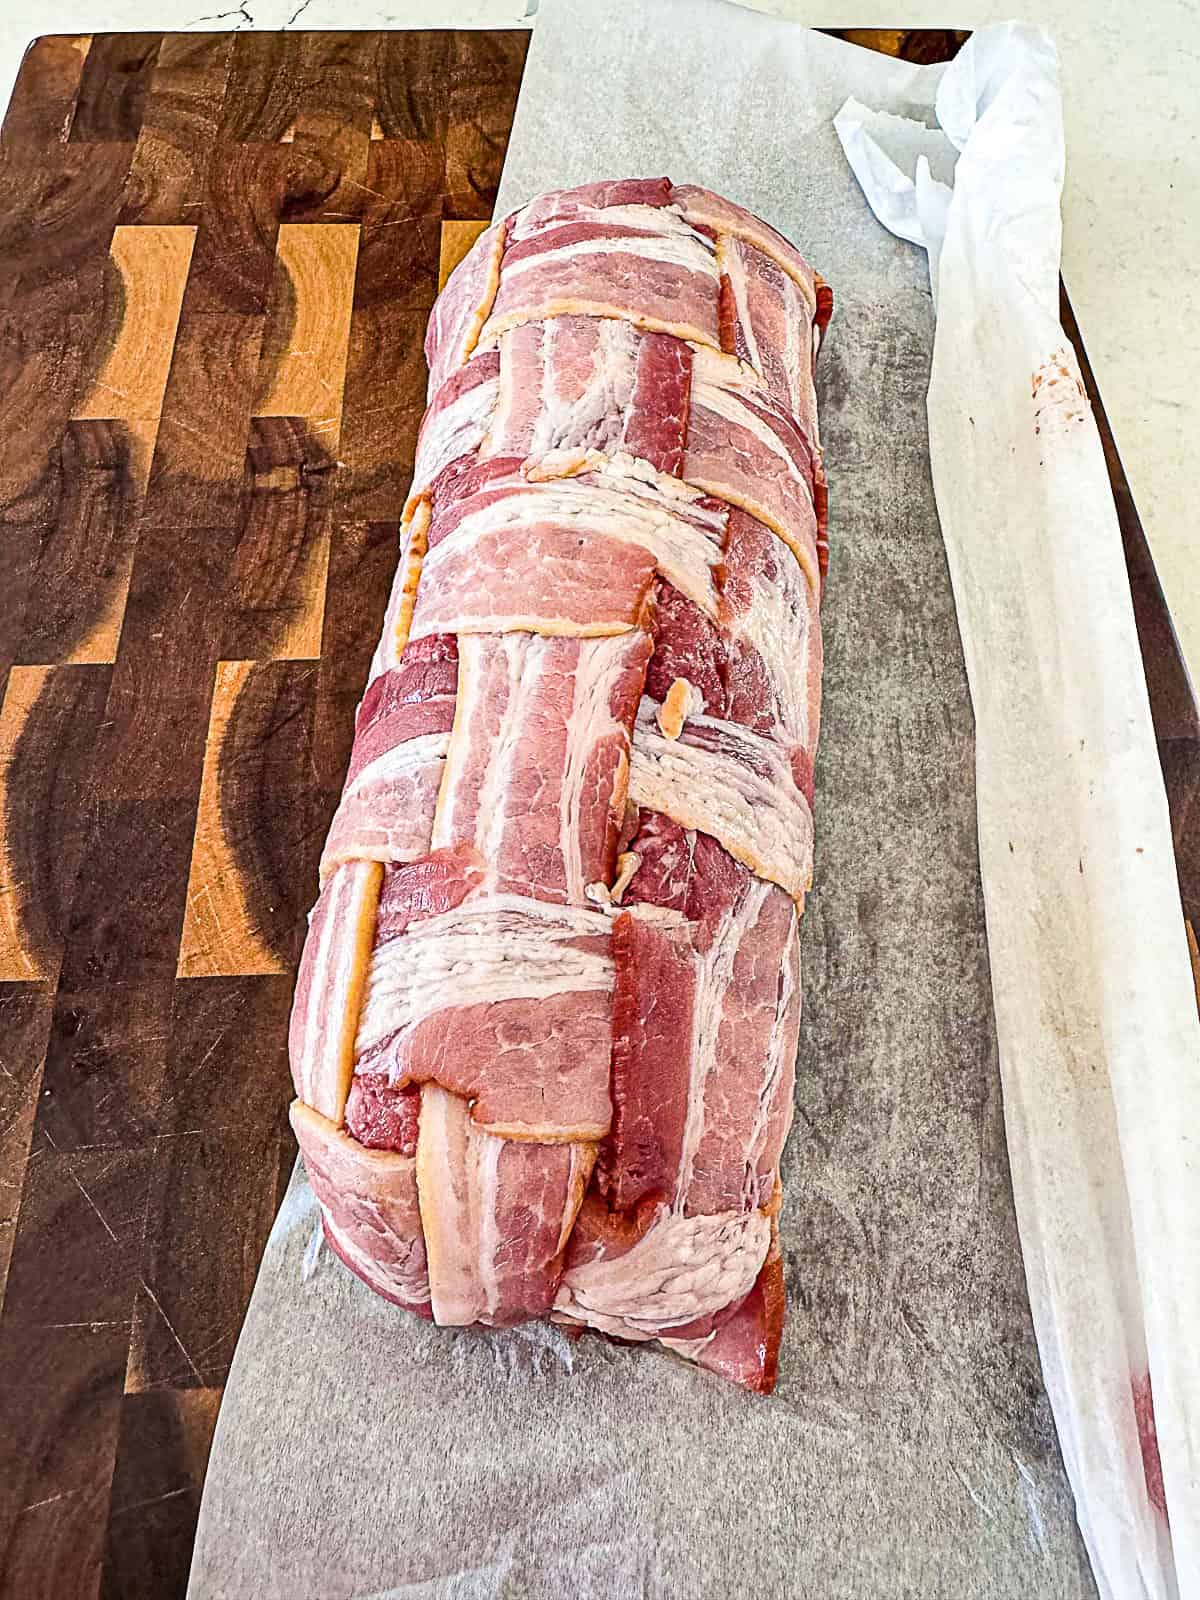 Bacon Weave holding food on Parchment Paper